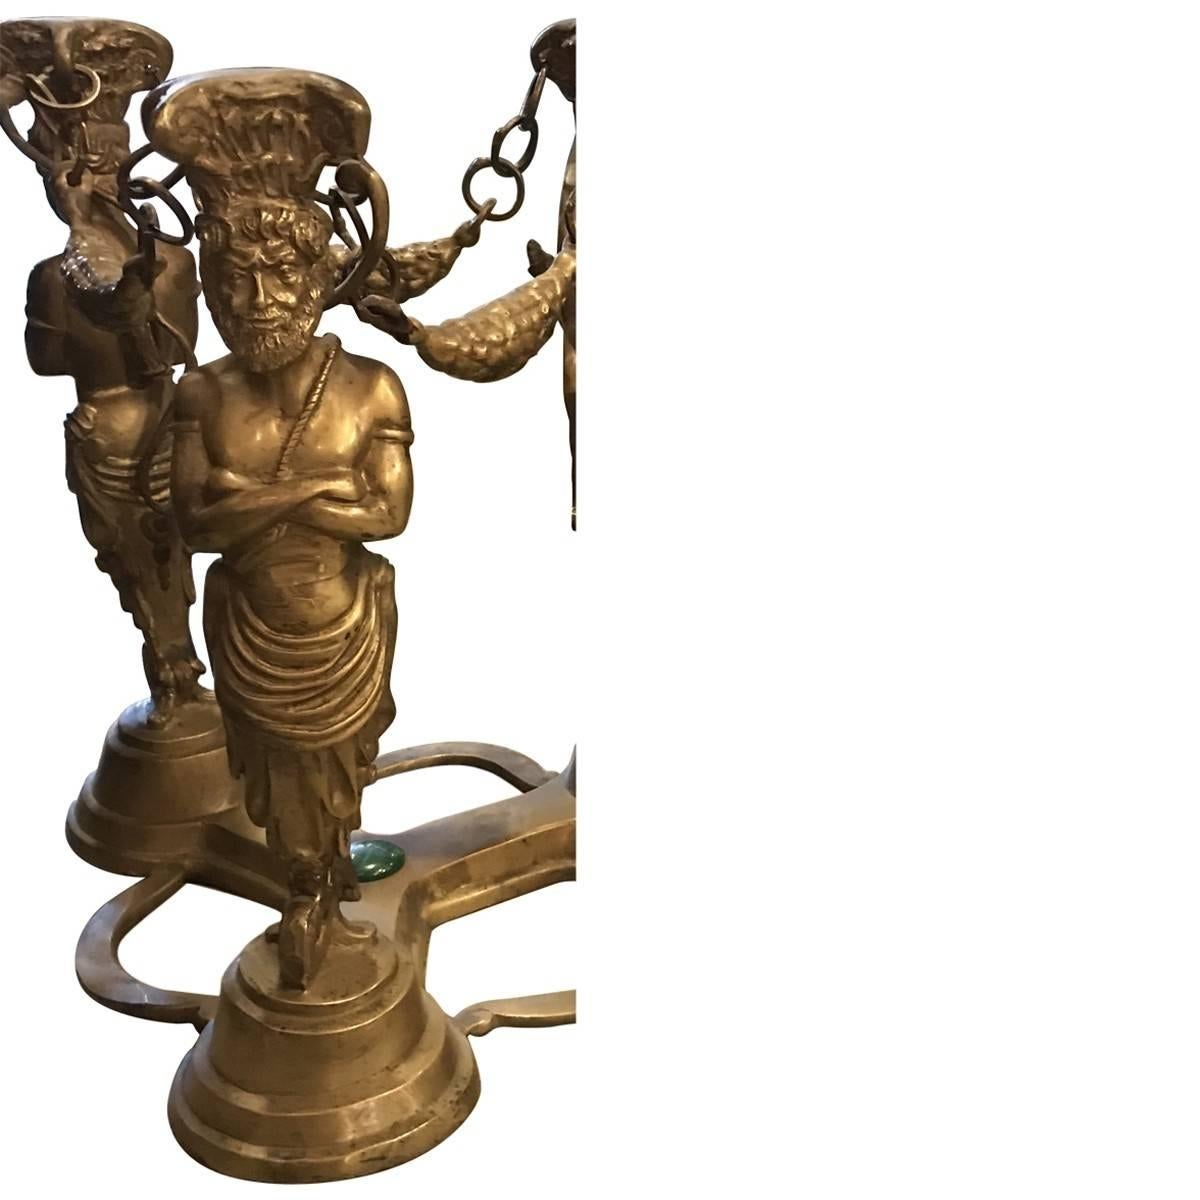 Inspired by the majesty of ancient Greek architecture and art, these Neo-Grec table bases. Antiques. Both are made of bronze with three sculpted male figures acting as supports. Central struts each decorated with a single stone jewel add to their